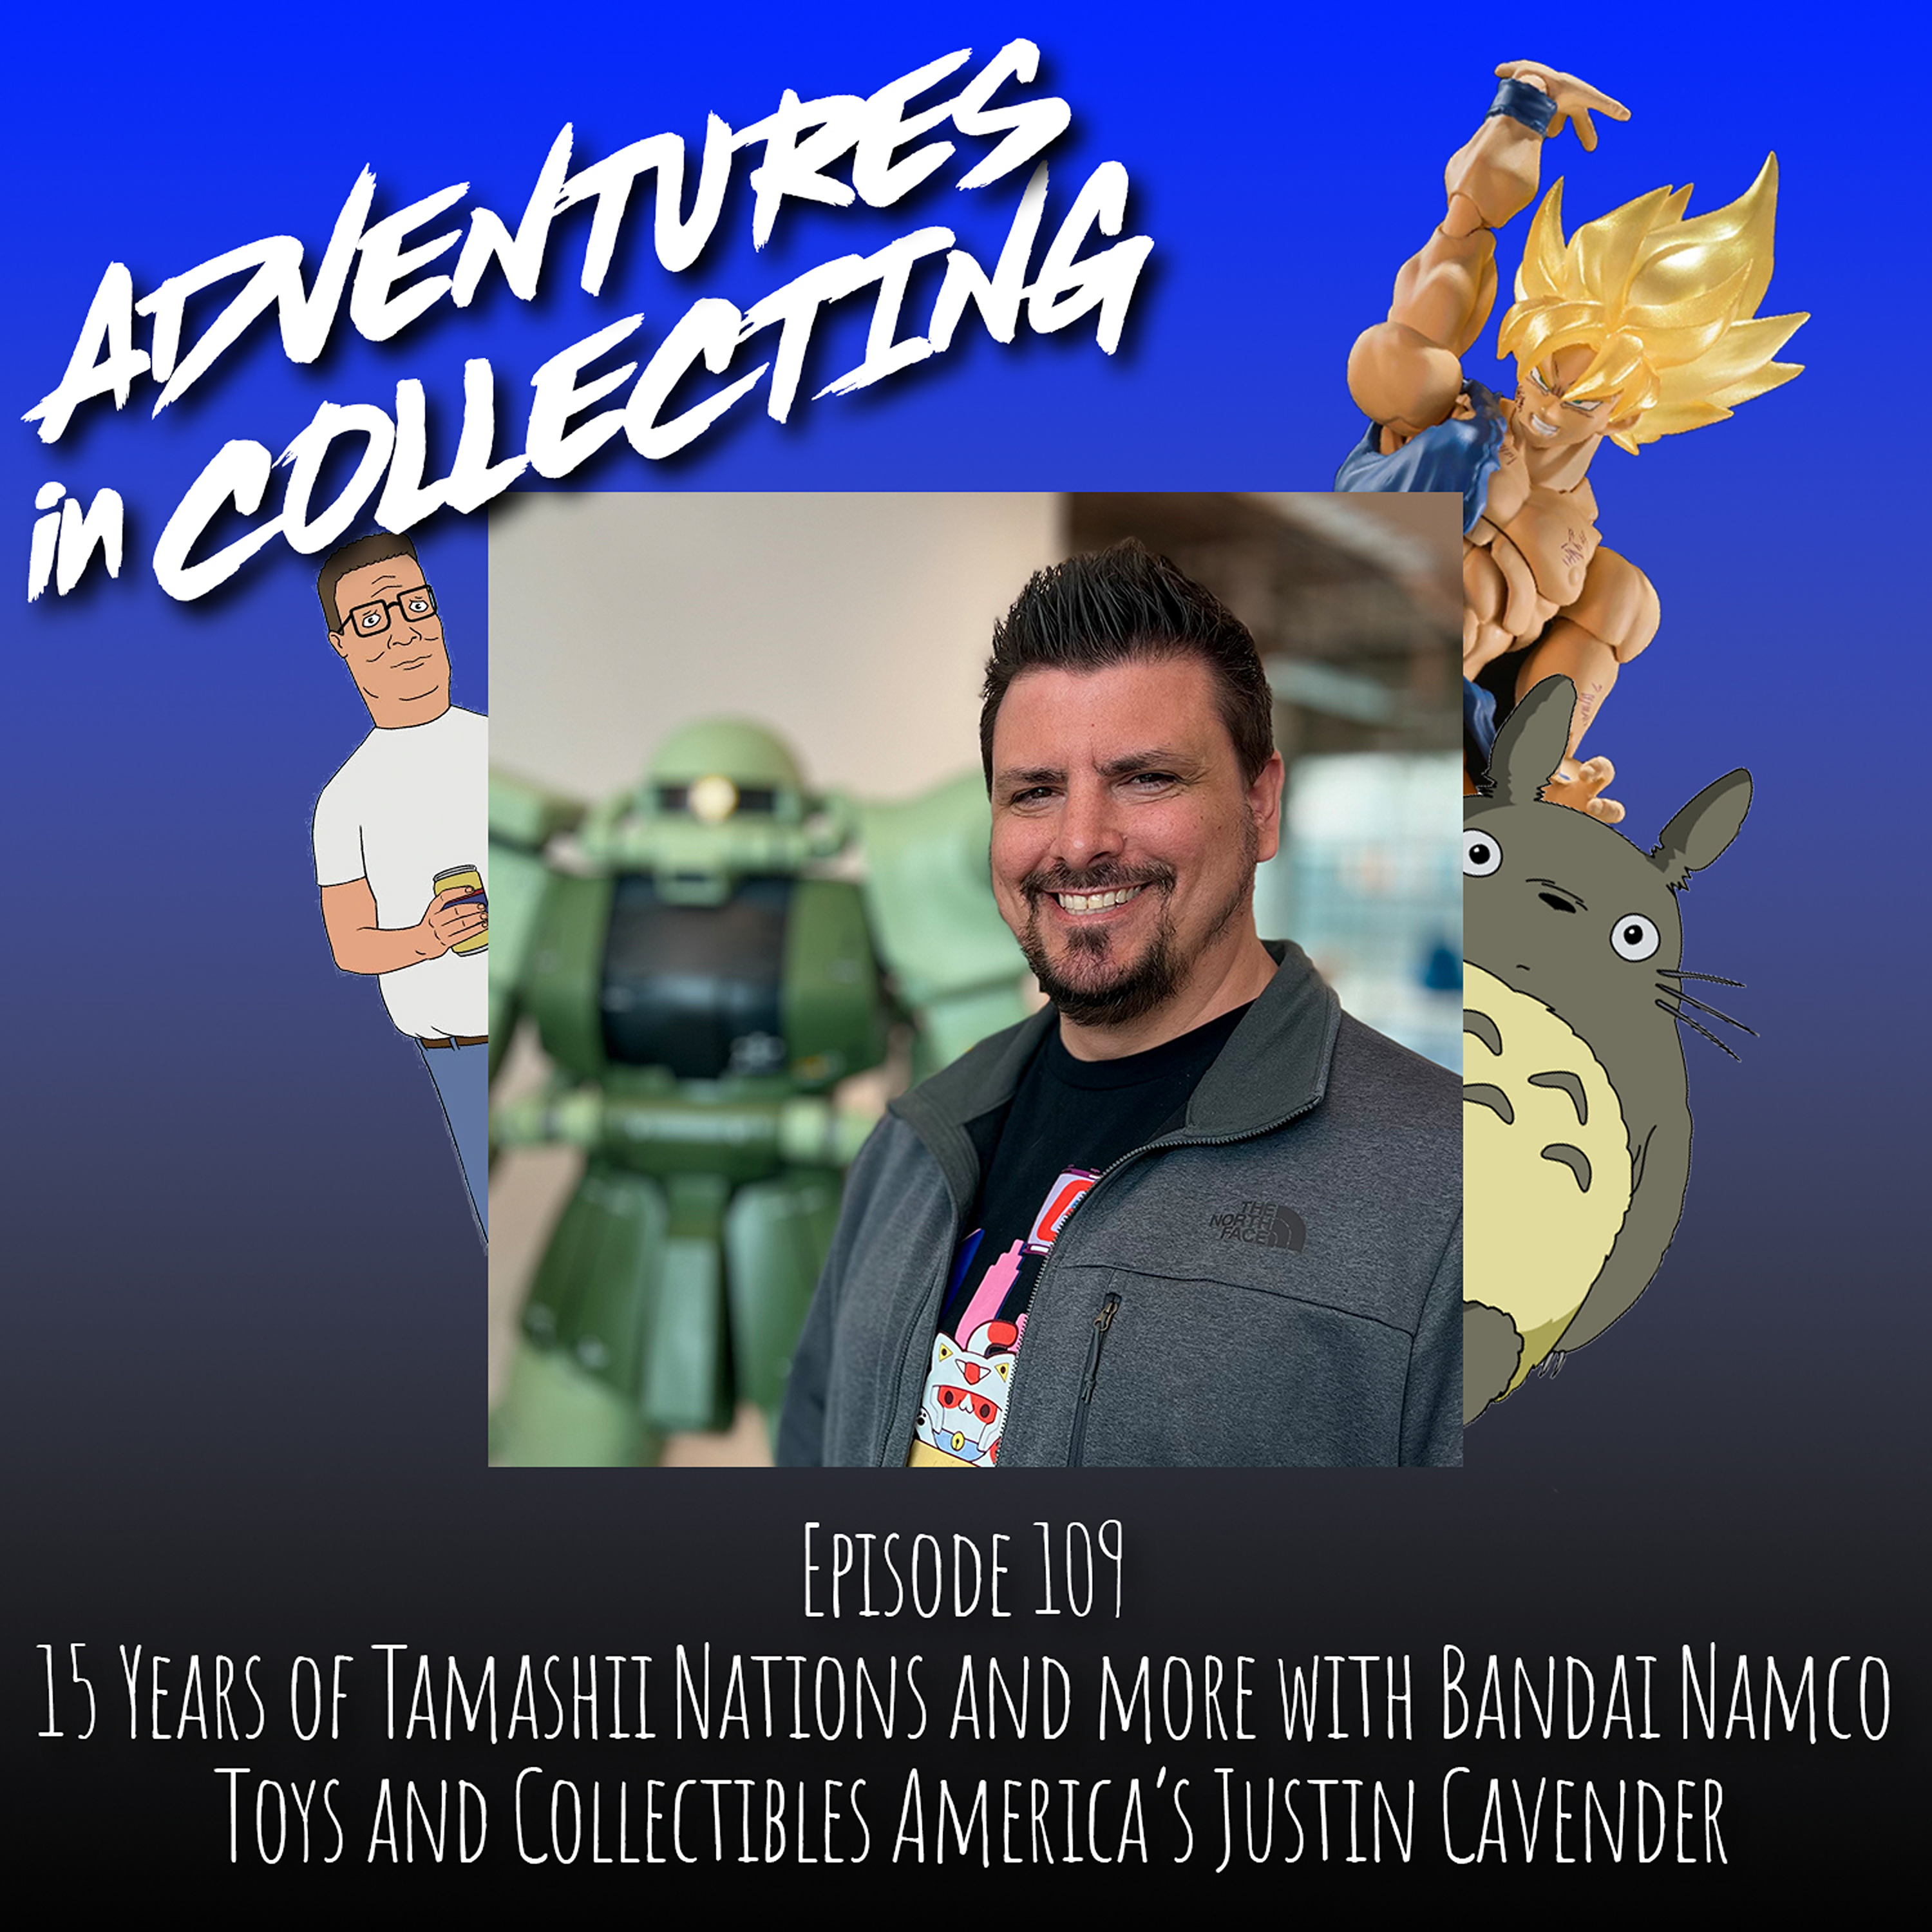 15 Years of Tamashii Nations and More with Bandai Namco Toys and Collectibles America's Justin Cavender